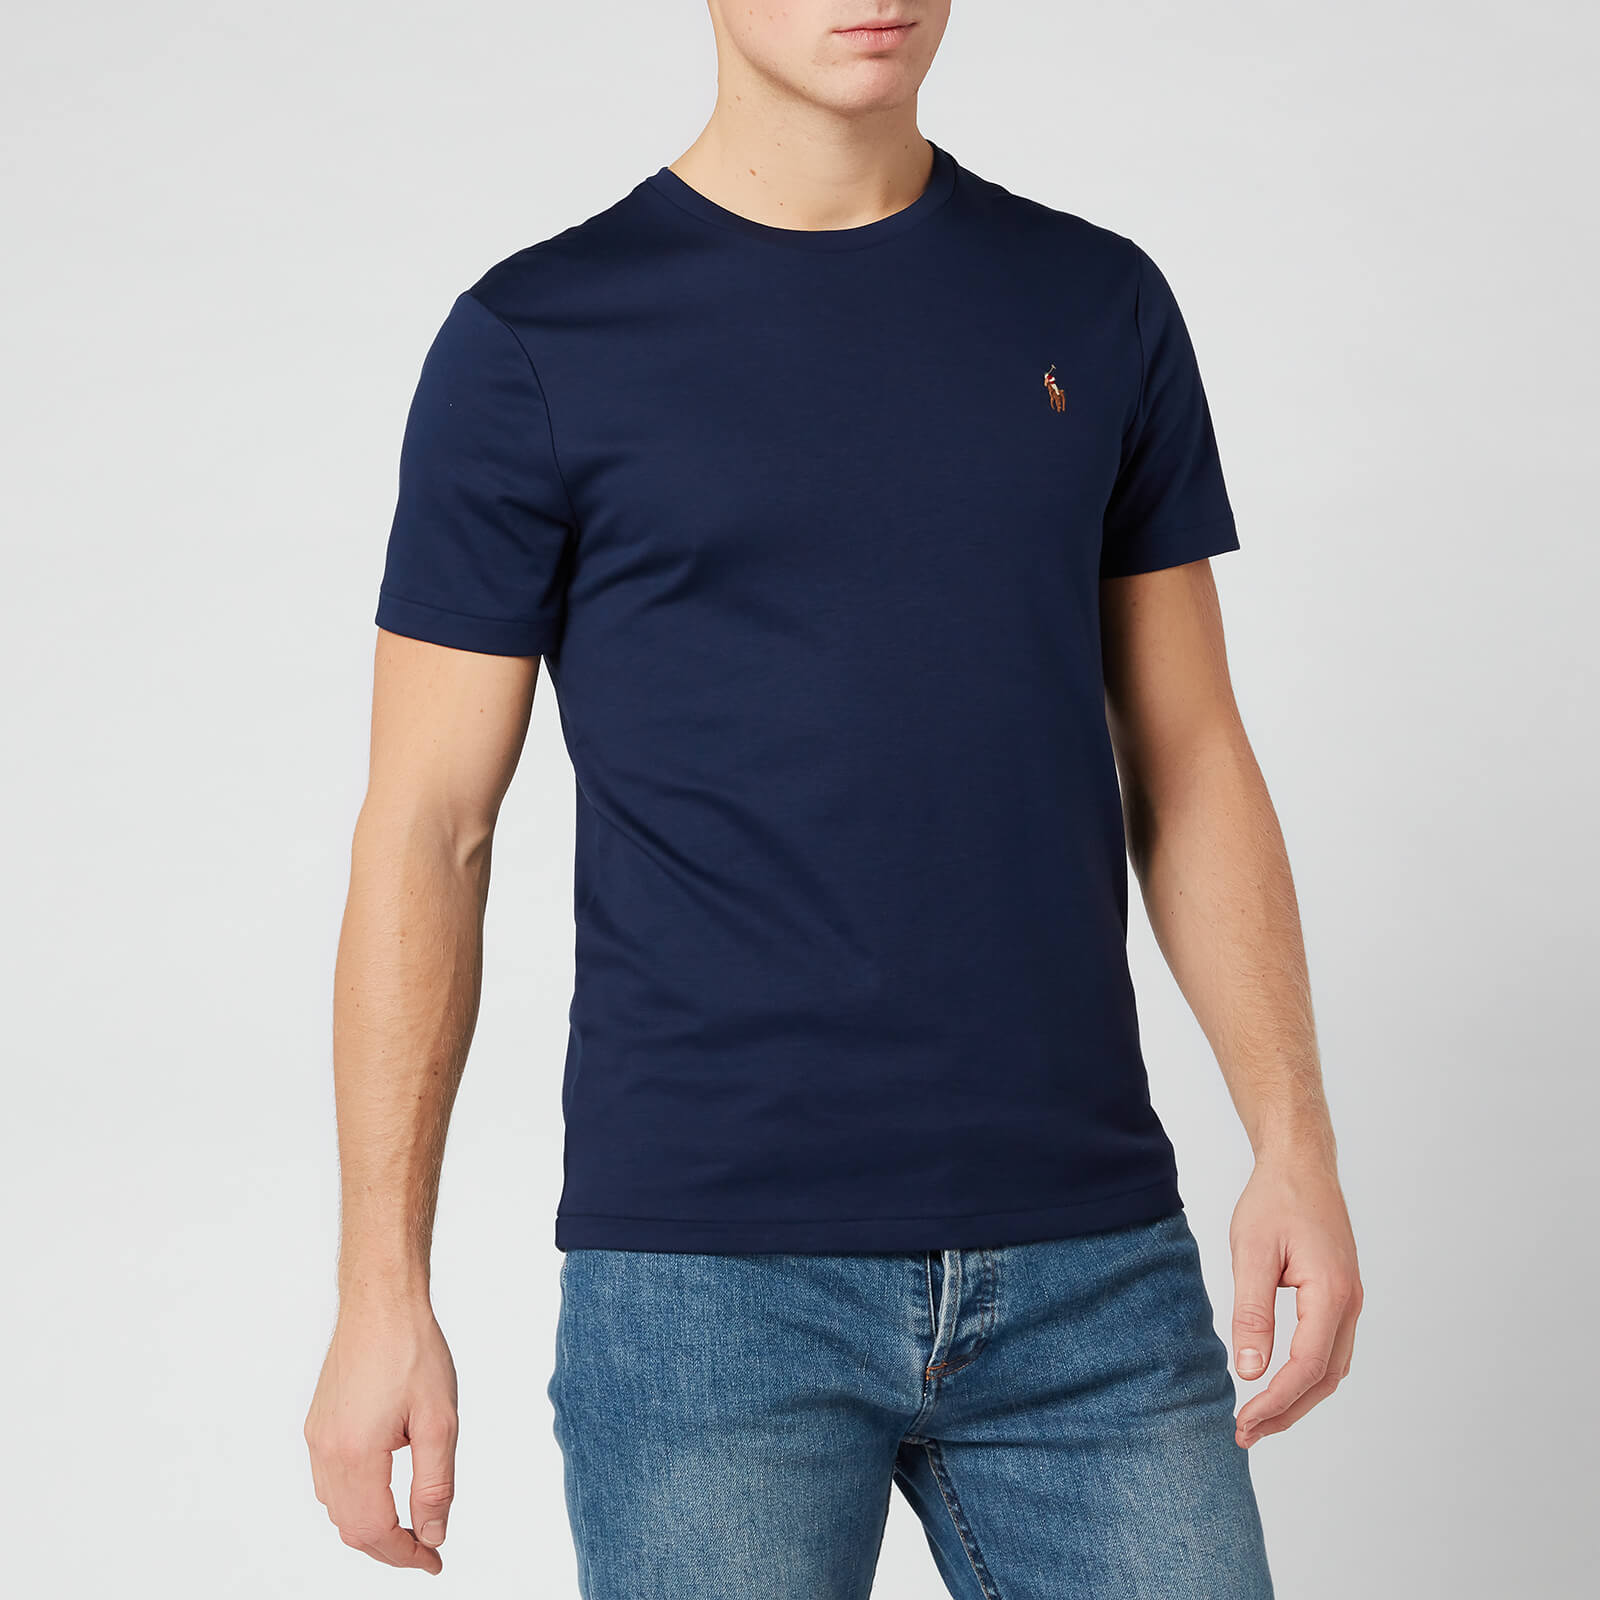 Polo Ralph Lauren Weiches Custom-Slim-Fit T-Shirt - French Navy - S